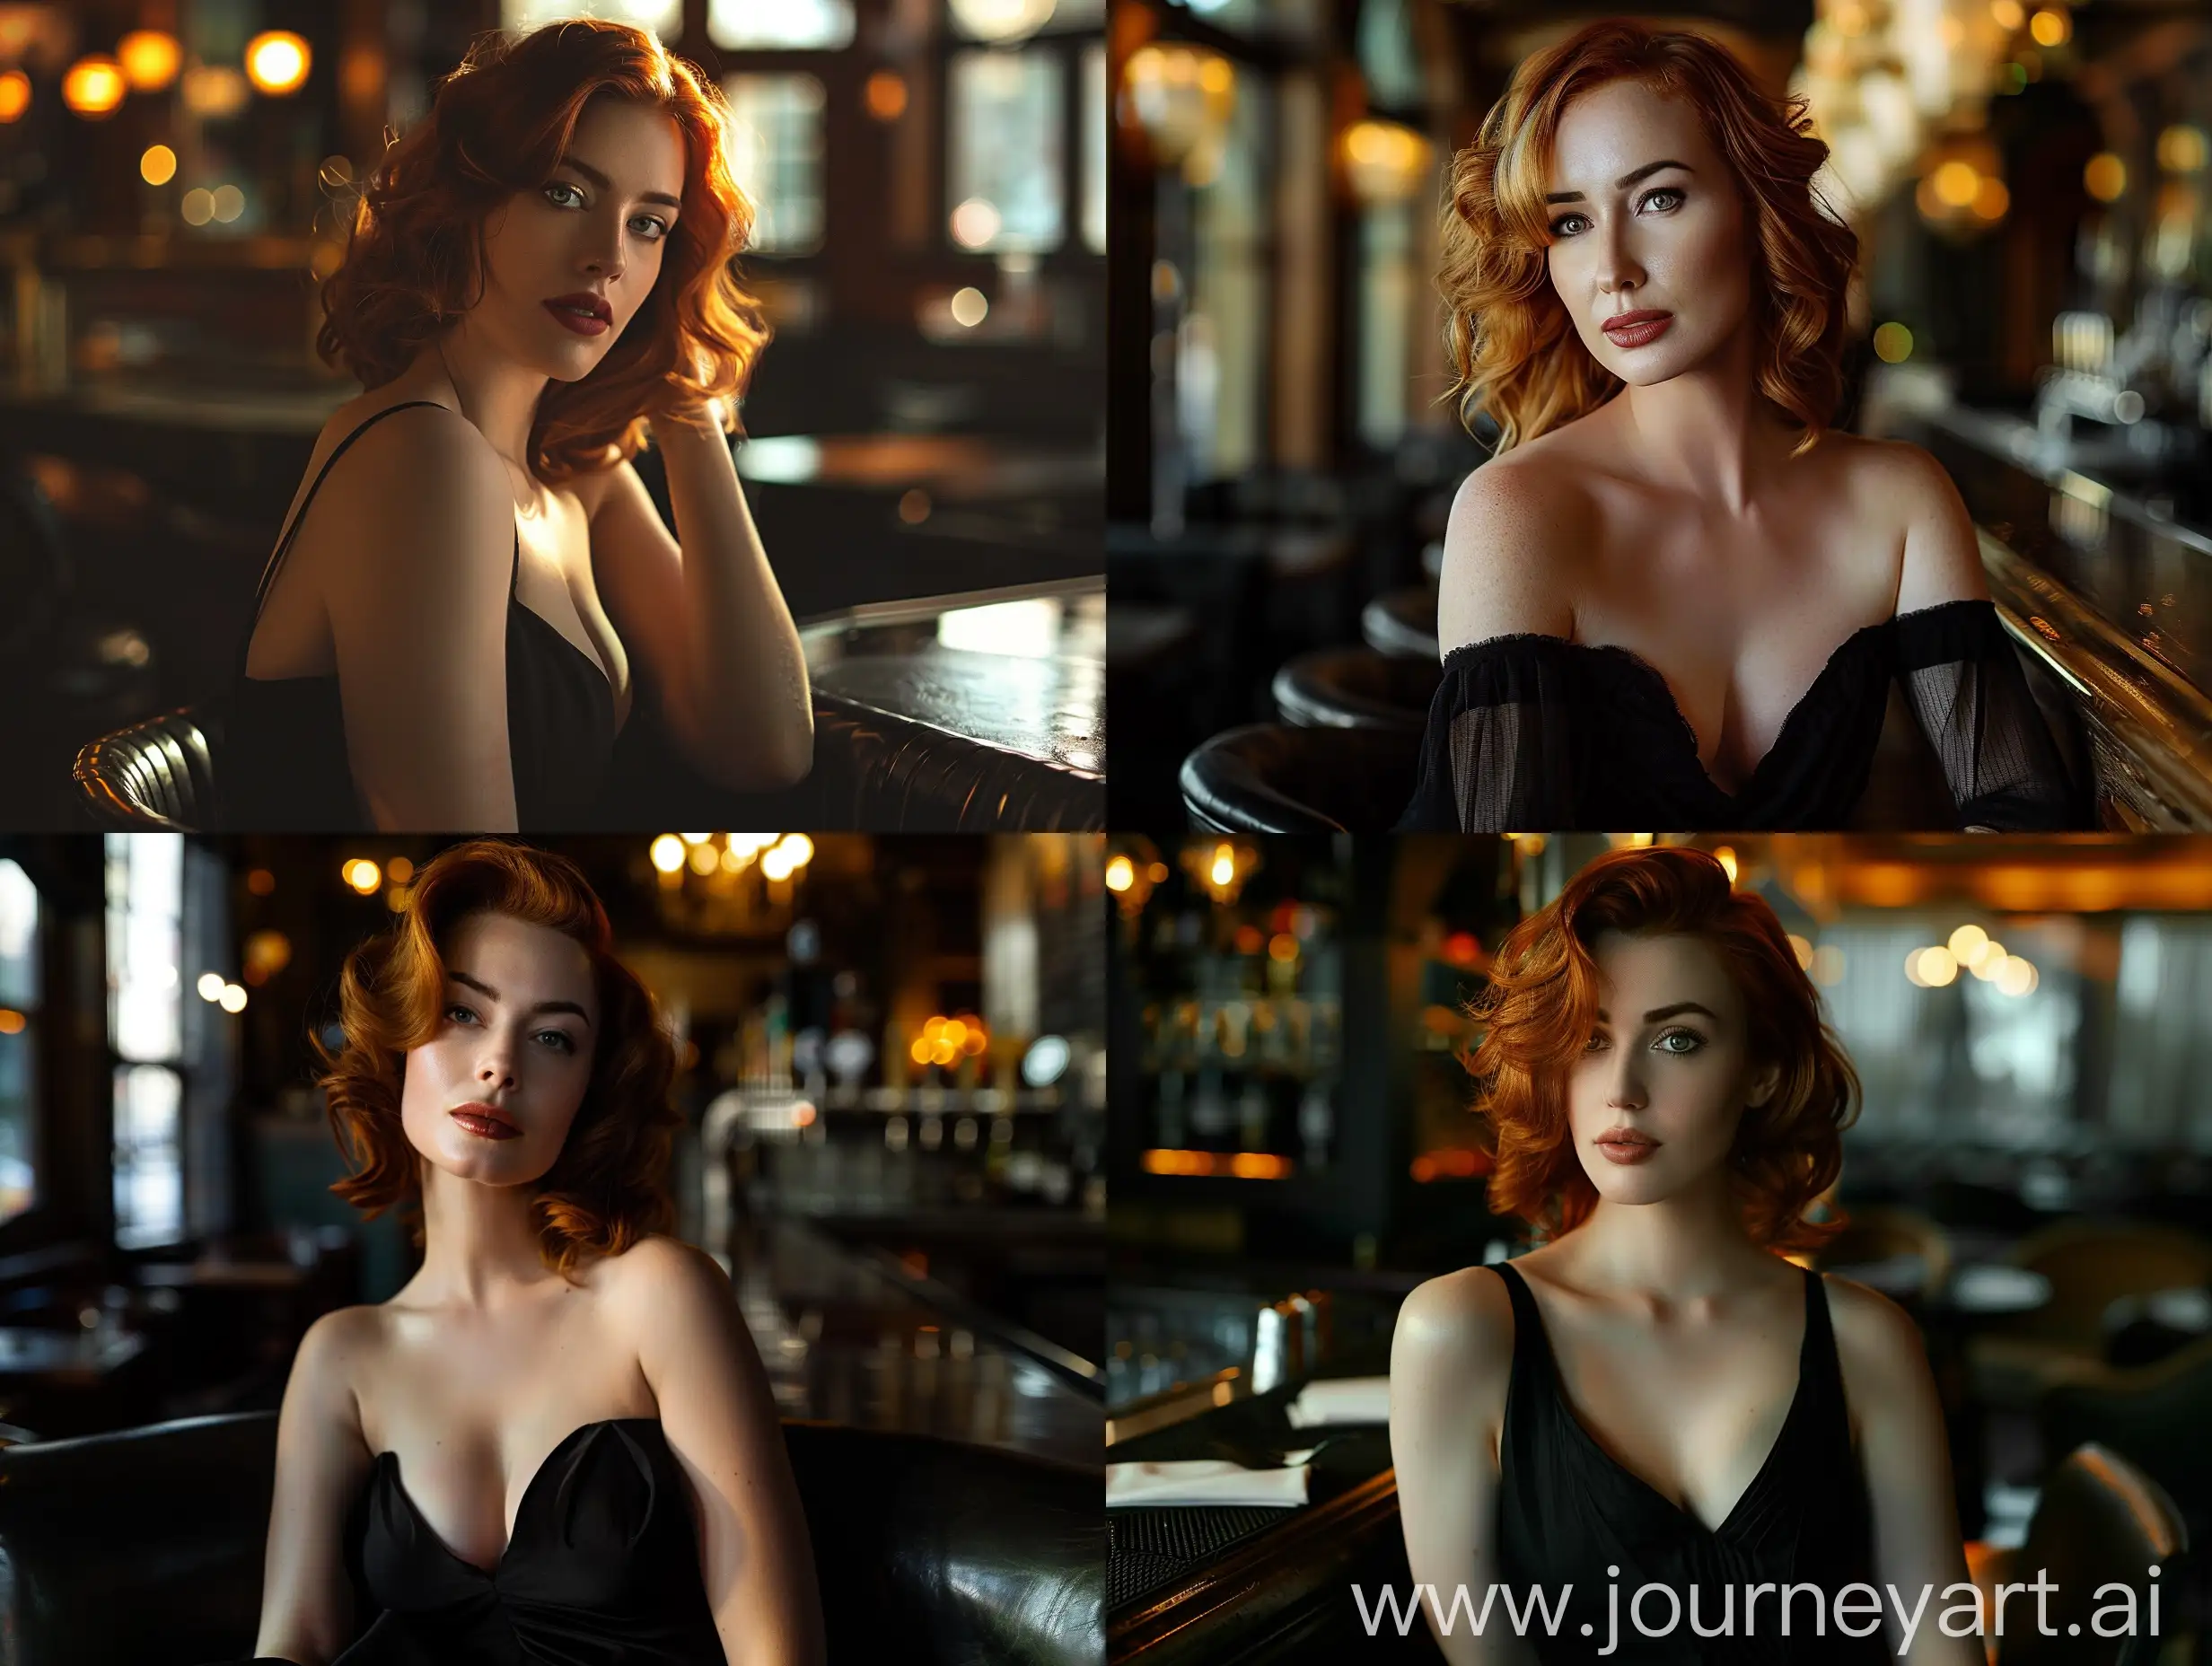 A beautiful woman with red hair, wearing a black dress, sitting in a bard, cinematic lighting 16:0 ar